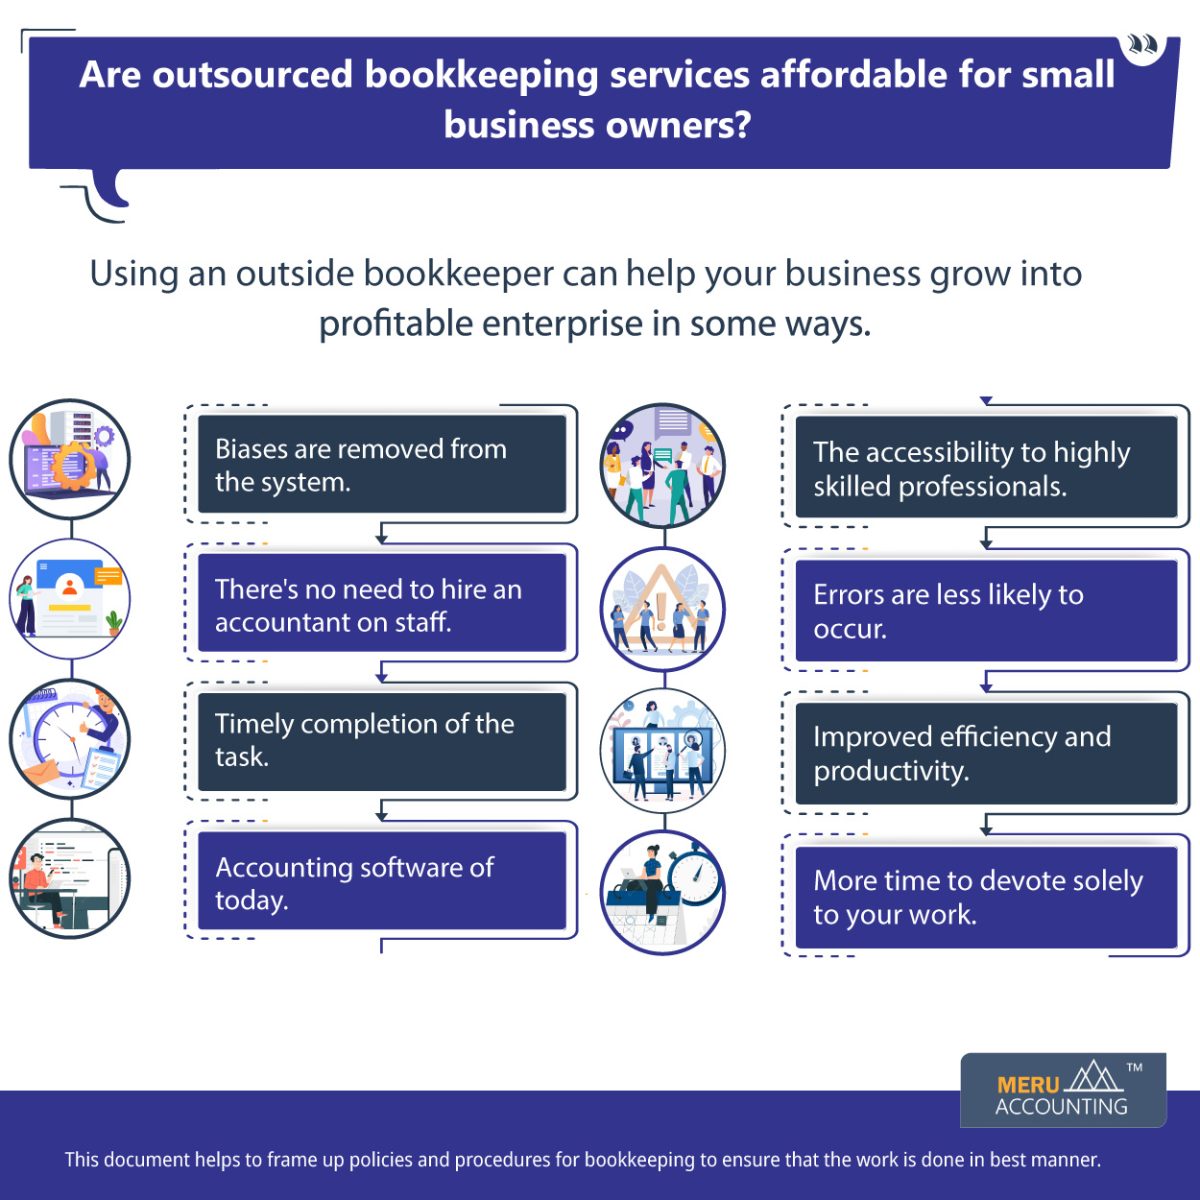 Are outsourced bookkeeping services affordable for small business owner?